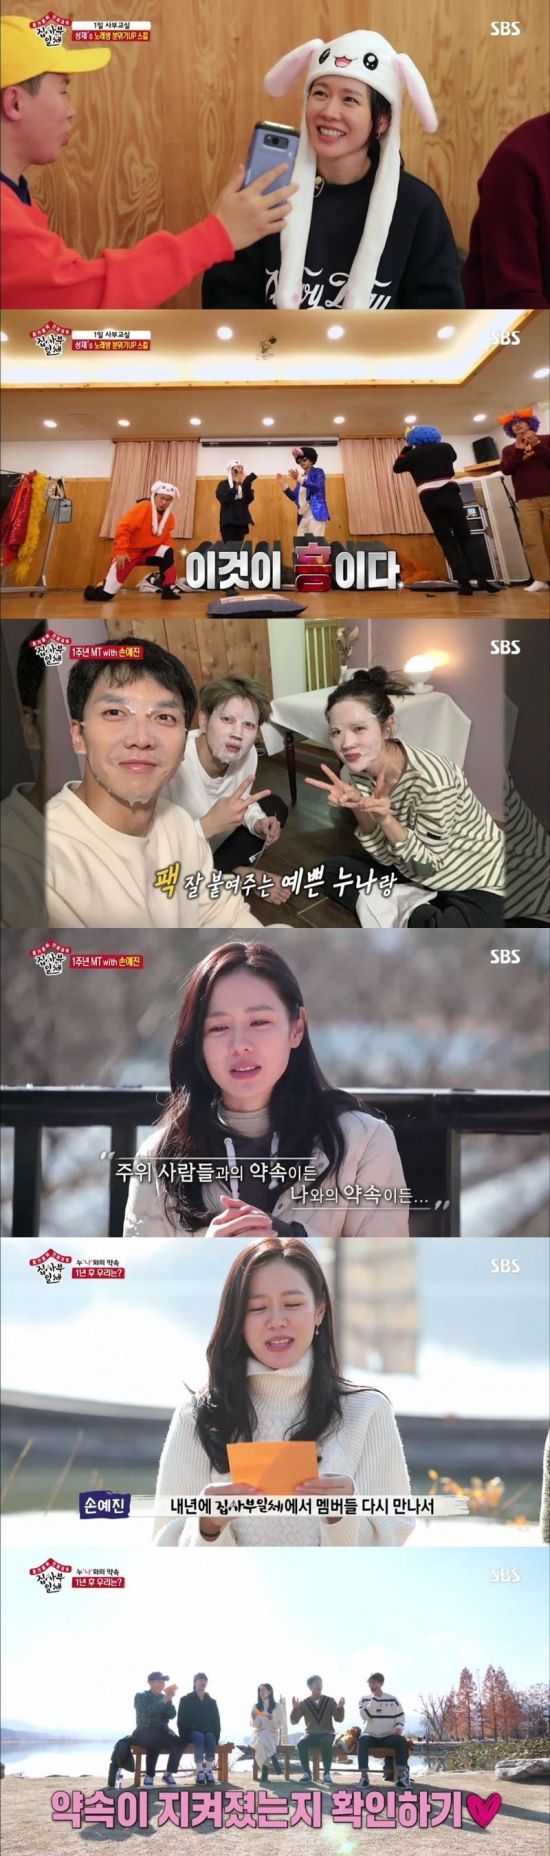 <p> Actress Son Ye-jin this All The Butlers members and 1 years later a reunion to some of the best 1 minute decorating.</p><p>9 will be broadcast SBS TV All The Butlersfurniture audience 11. 1%, the Top 14. 2%(Nielsen Korea Metropolitan Part 2 of the standard).</p><p>This day, All The Butlersin actor Lee Sang-yoon, the singer Lee Seung-gi, comedian Yang Se-hyeong, a group BtoBs nurturing presence is 1 anniversary of Son Ye-jin together with the special MT, enjoying the look was unveiled.</p><p>Son Ye-jin is a game from the dance until the perfect preparation and competencies with members and captivate viewers. He is a long time top keep the top of the actors meticulous planning and self-management course, human attraction and the perfect one of all.</p><p>First member and Son Ye-jin is dinner time and that the ban gamethe body into the pool. Son Ye-jin to break down for the members of the co-op this with Son Ye-jin is the star of this fall-off was avoided. Eventually foster and Lee Seung-gi defeat to dinner preparation began. The two Son Ye-jin this directly to the prepared ingredients into the barbecue to create and Son Ye-jin and MT is absurd. A real gift,and tingle you.</p><p>Meal after the game. Son Ye-jin and the members body speakto the movie title to fit the game to progress. Lee Seung-gi and Foster, Lee Sang-yoon and Yang Se-hyeong each team and Son Ye-jin in this dices. Yang Se-hyeong is Lee Sang-yoon and the illusion of breathing and bet lightly in victory, or in the exemption.</p><p>Since Son Ye-jin is a member of the three do share(三人行必有我師)from three people with of them necessarily in one person is the master of that story,and 1 use some of the to be proposed. Son Ye-jin of the Ministry changed into Lee Seung-gi, Lee Sang-yoon, Yang Se-hyeong, nurture creative self-confident theme 10 minutes into the lecture began.</p><p>Lee Sang-yoon is the argument for using the speed mental arithmetic, Yang Se-hyeong is the horse into the River, Lee Seung-gi is 25 years old expensive chat method, six women, and karaoke atmosphere in the bootstrap of the river. Since the karaoke practice is unfolded, and Son Ye-jins excitement exploded and eye-catching. The rabbit who wrote Son Ye-jin is a member with them for their bus inand the gorgeous stage. It is a reversal of attractive members was originally hyped a lot and playing well sister. teach drill there was no need,said Marvel.</p><p>The next morning, Son Ye-jin is members toast to directly and together the two walk out on her. Son Ye-jin is a member them, I promise. And, with the promise of a man and the promise of the all importanta few days promise to do one next year kept the show will be fun,he said.</p><p>This nurturing presence is the solo album challenge, Lee Seung-gi is a week-long trip to the desert, Yang Se-hyeong - guitars, Lee Sang-yoon is playing the piano to the goals for next year as promised. Finally Son Ye-jin in the next year All The Butlers from themembers meet again in the promise was kept to verify that the2019 re-Smoking pledge. That scene, per minute viewership of 14. 2%of the best 1 minute accounted.</p>